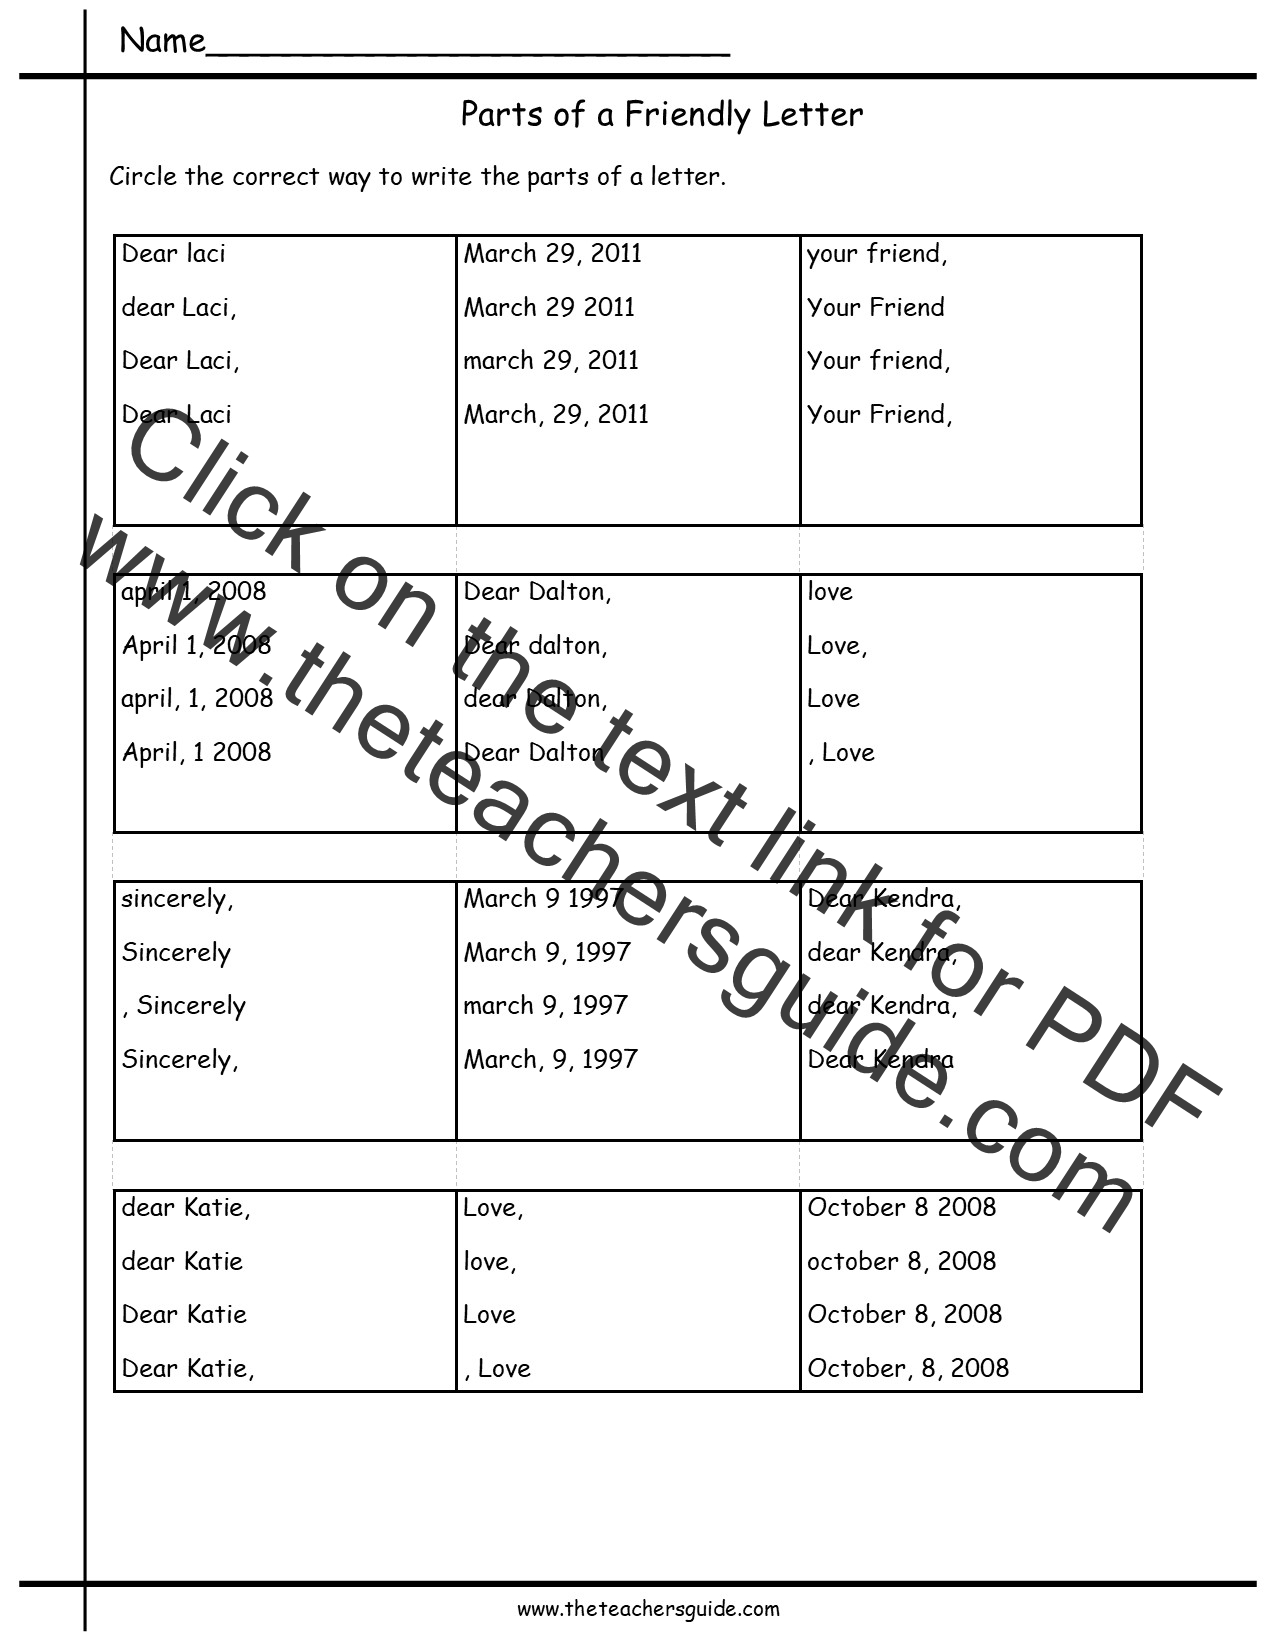 Friendly Letter Worksheets From The Teacher S Guide